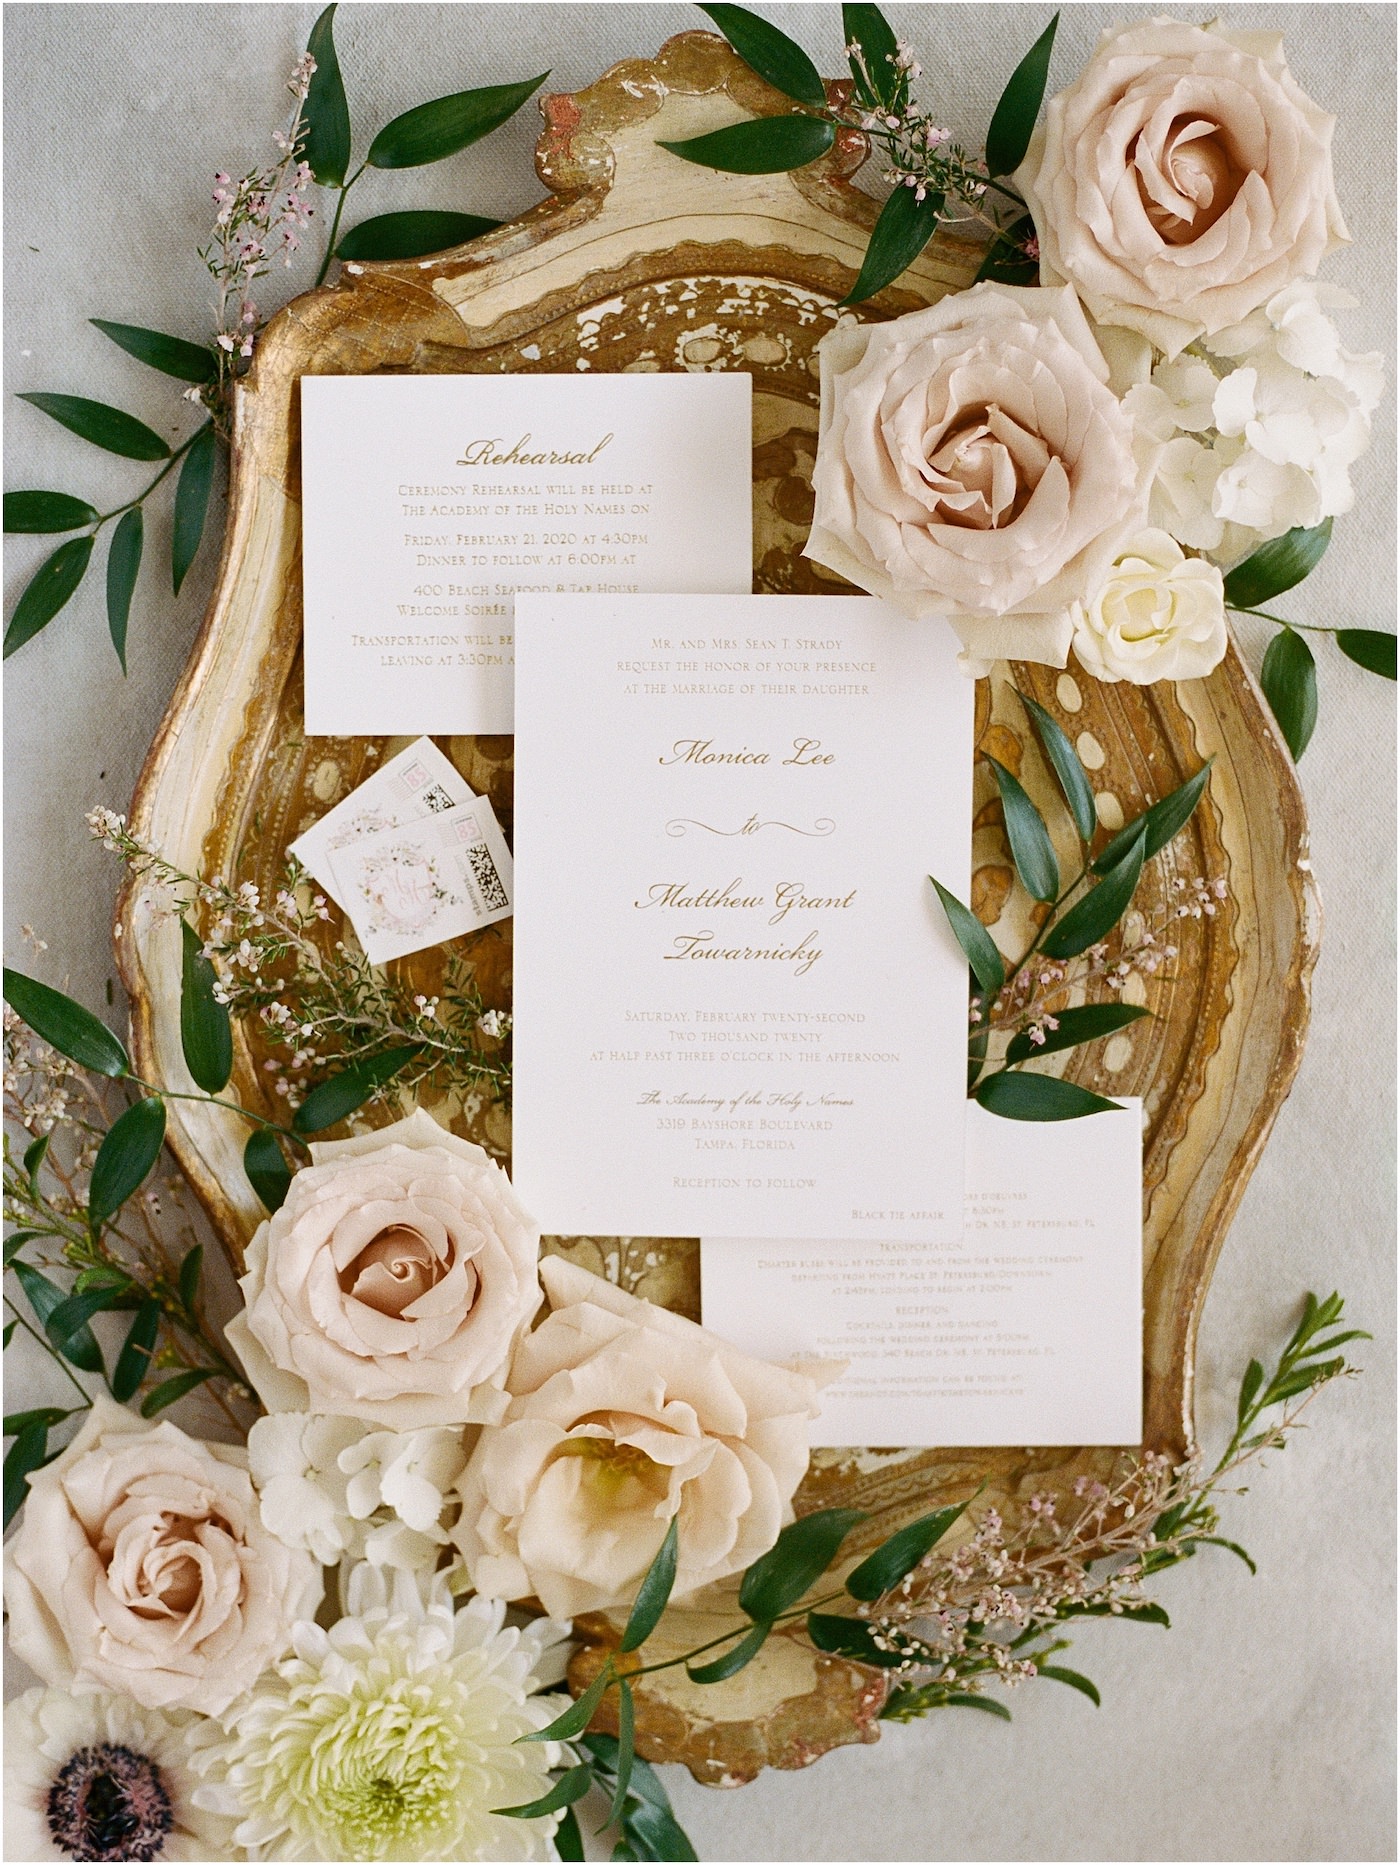 Tampa Wedding Stationery Suite Lay Flat Photo with Ornate Gold Tray and Champagne Rose Flowers | Classic Wedding Invitation with Gold Calligraphy